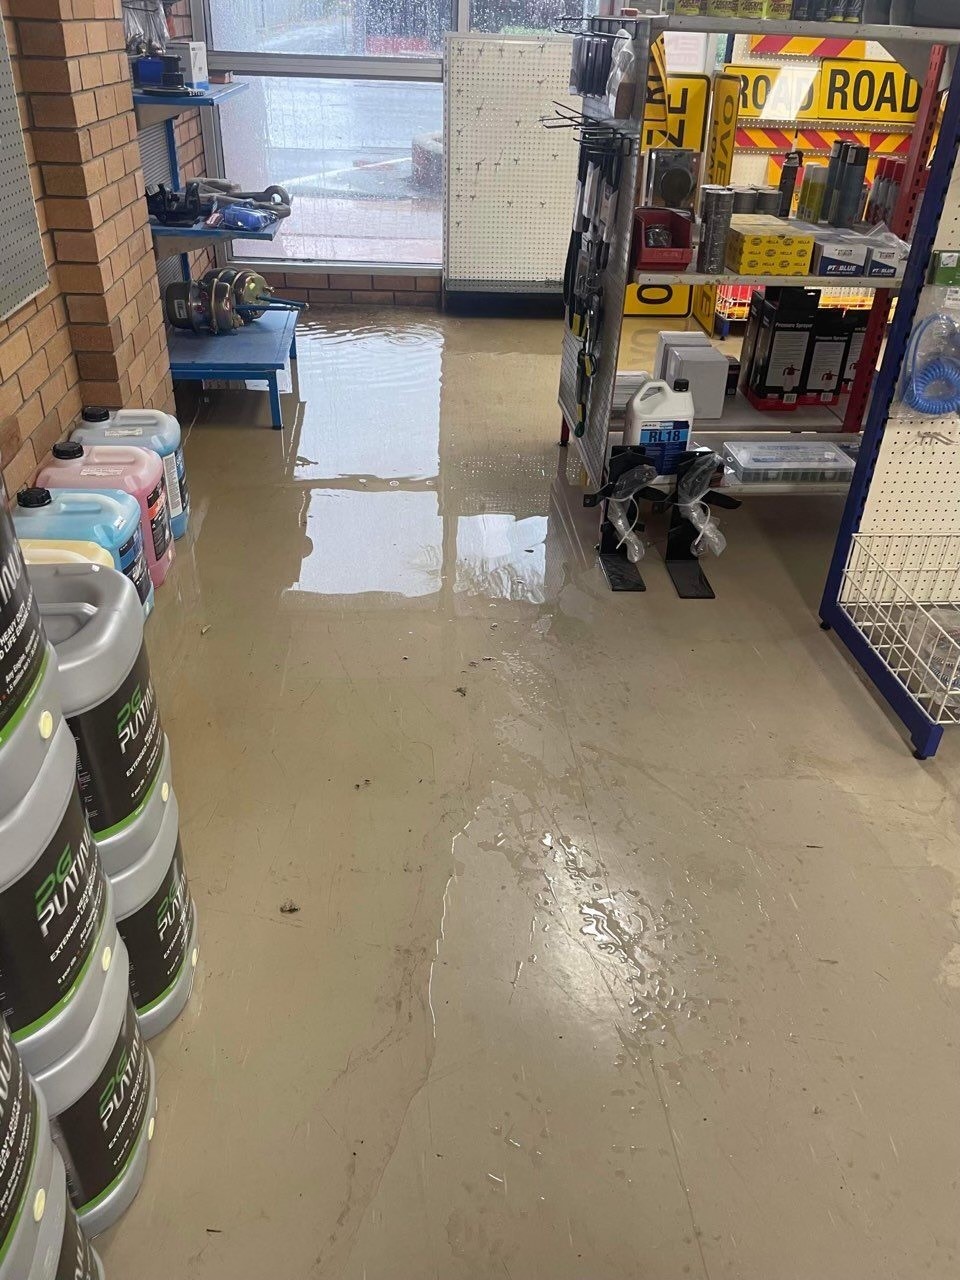 Water covers part of a shop floor.